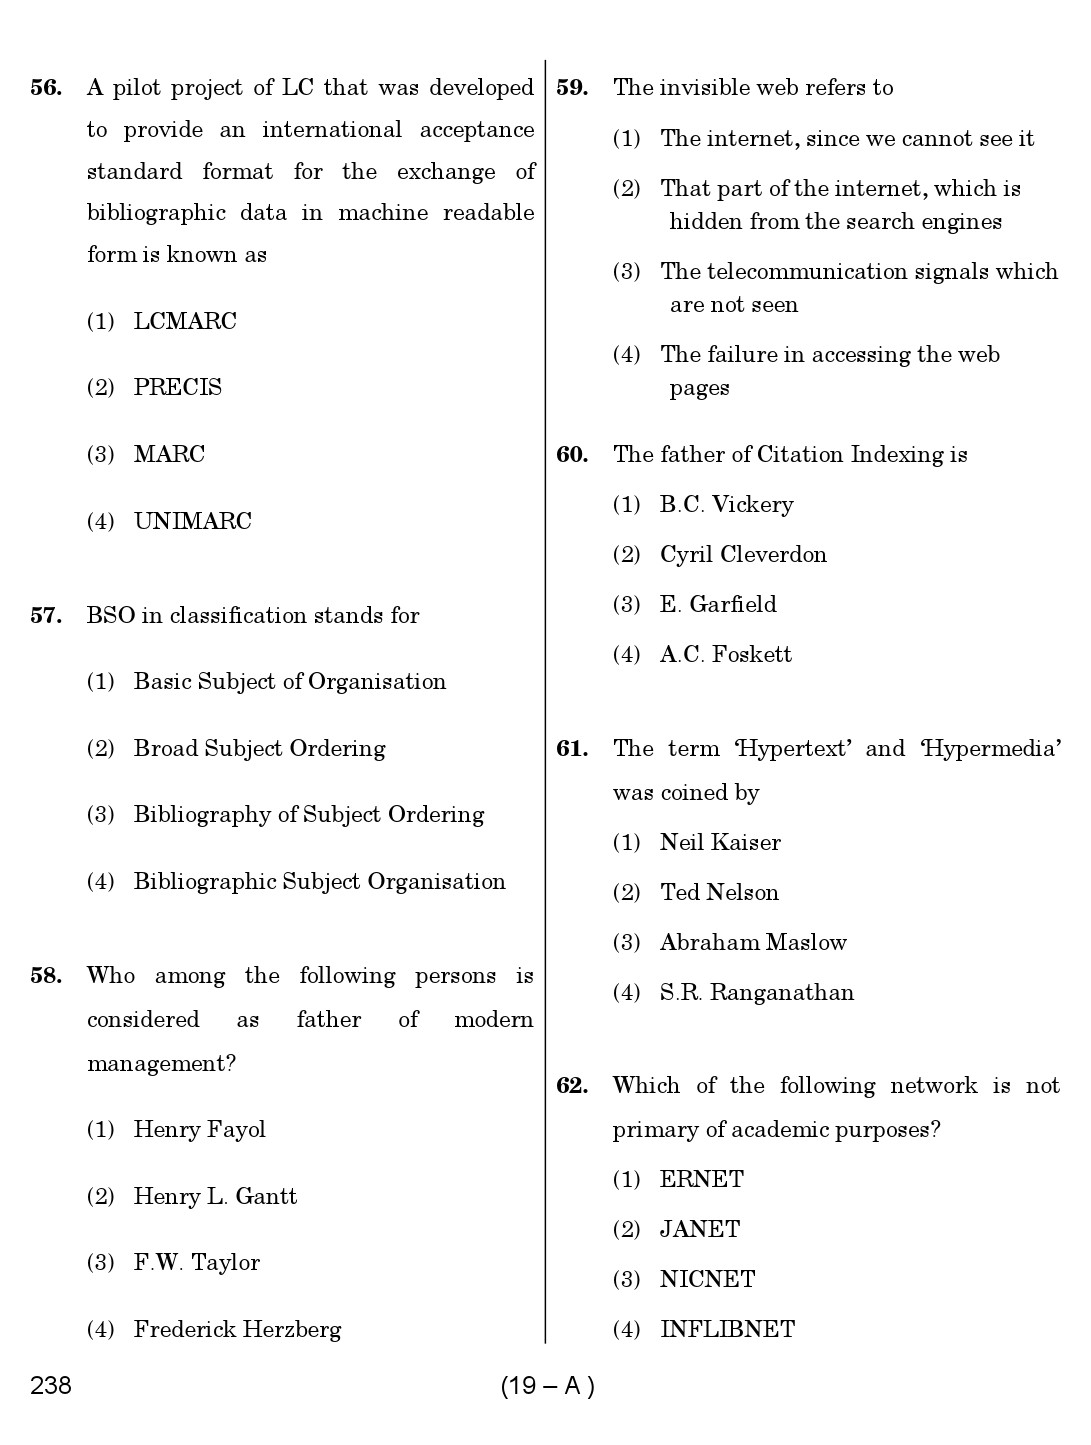 Karnataka PSC 238 Specific Paper II Librarian Exam Sample Question Paper 19